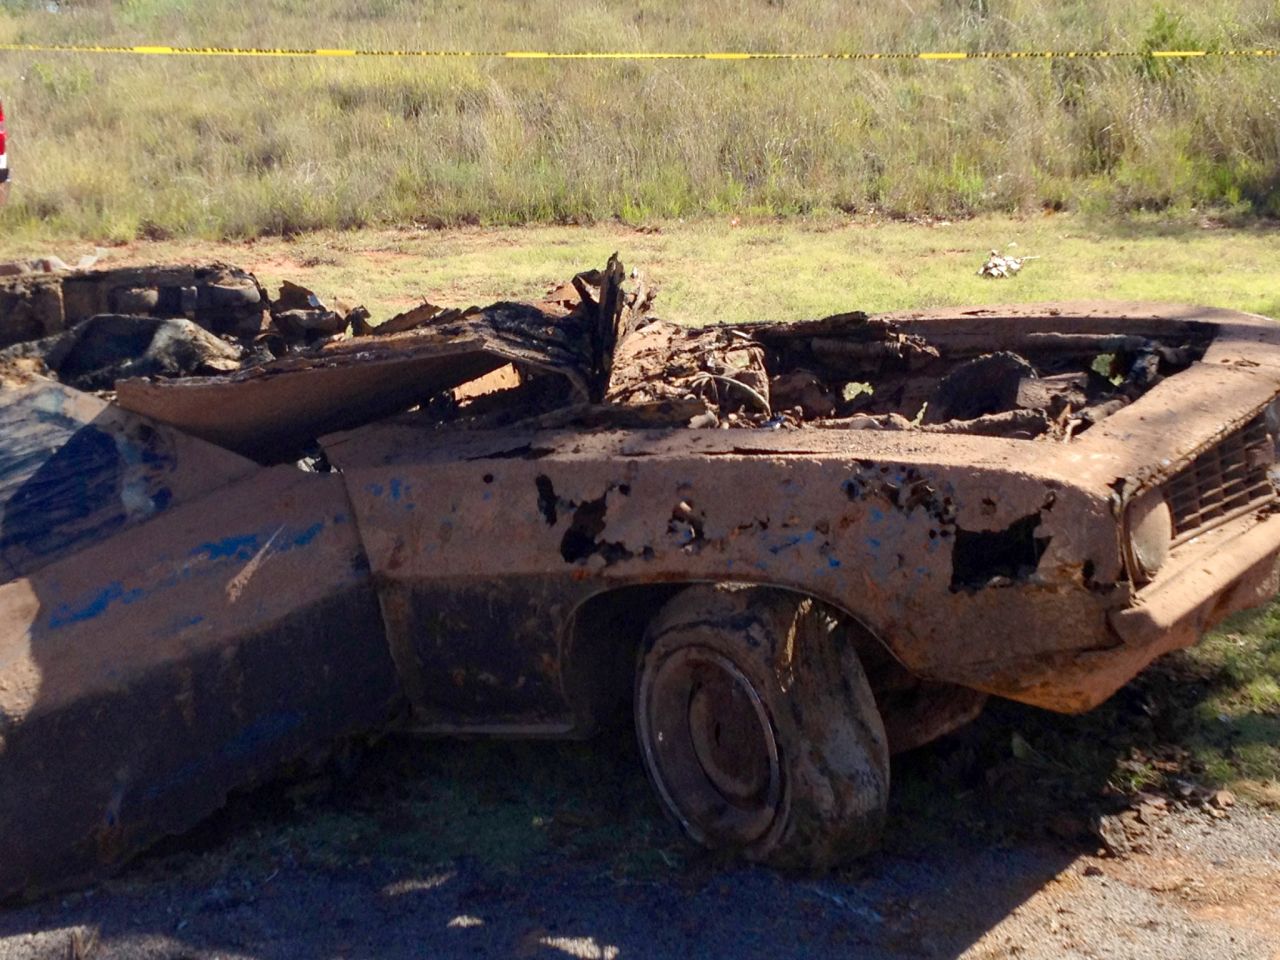 The Camaro pulled from the lake is seen last year after investigators began their work.